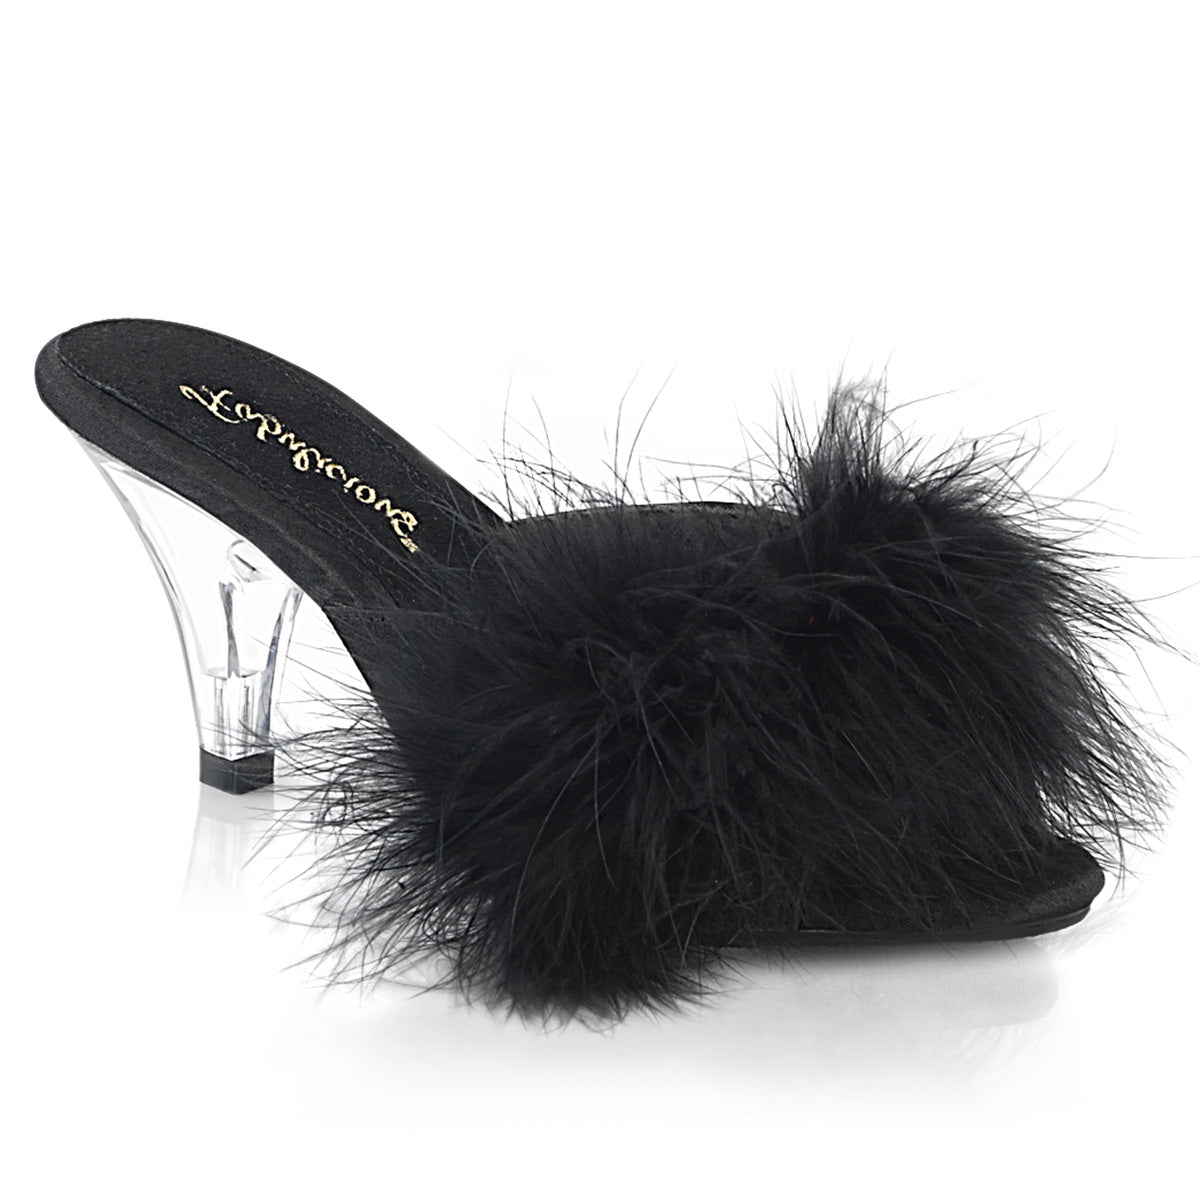 BELLE-301F Fabulicious 3 Inch Heel Black Marabou Sexy Shoes